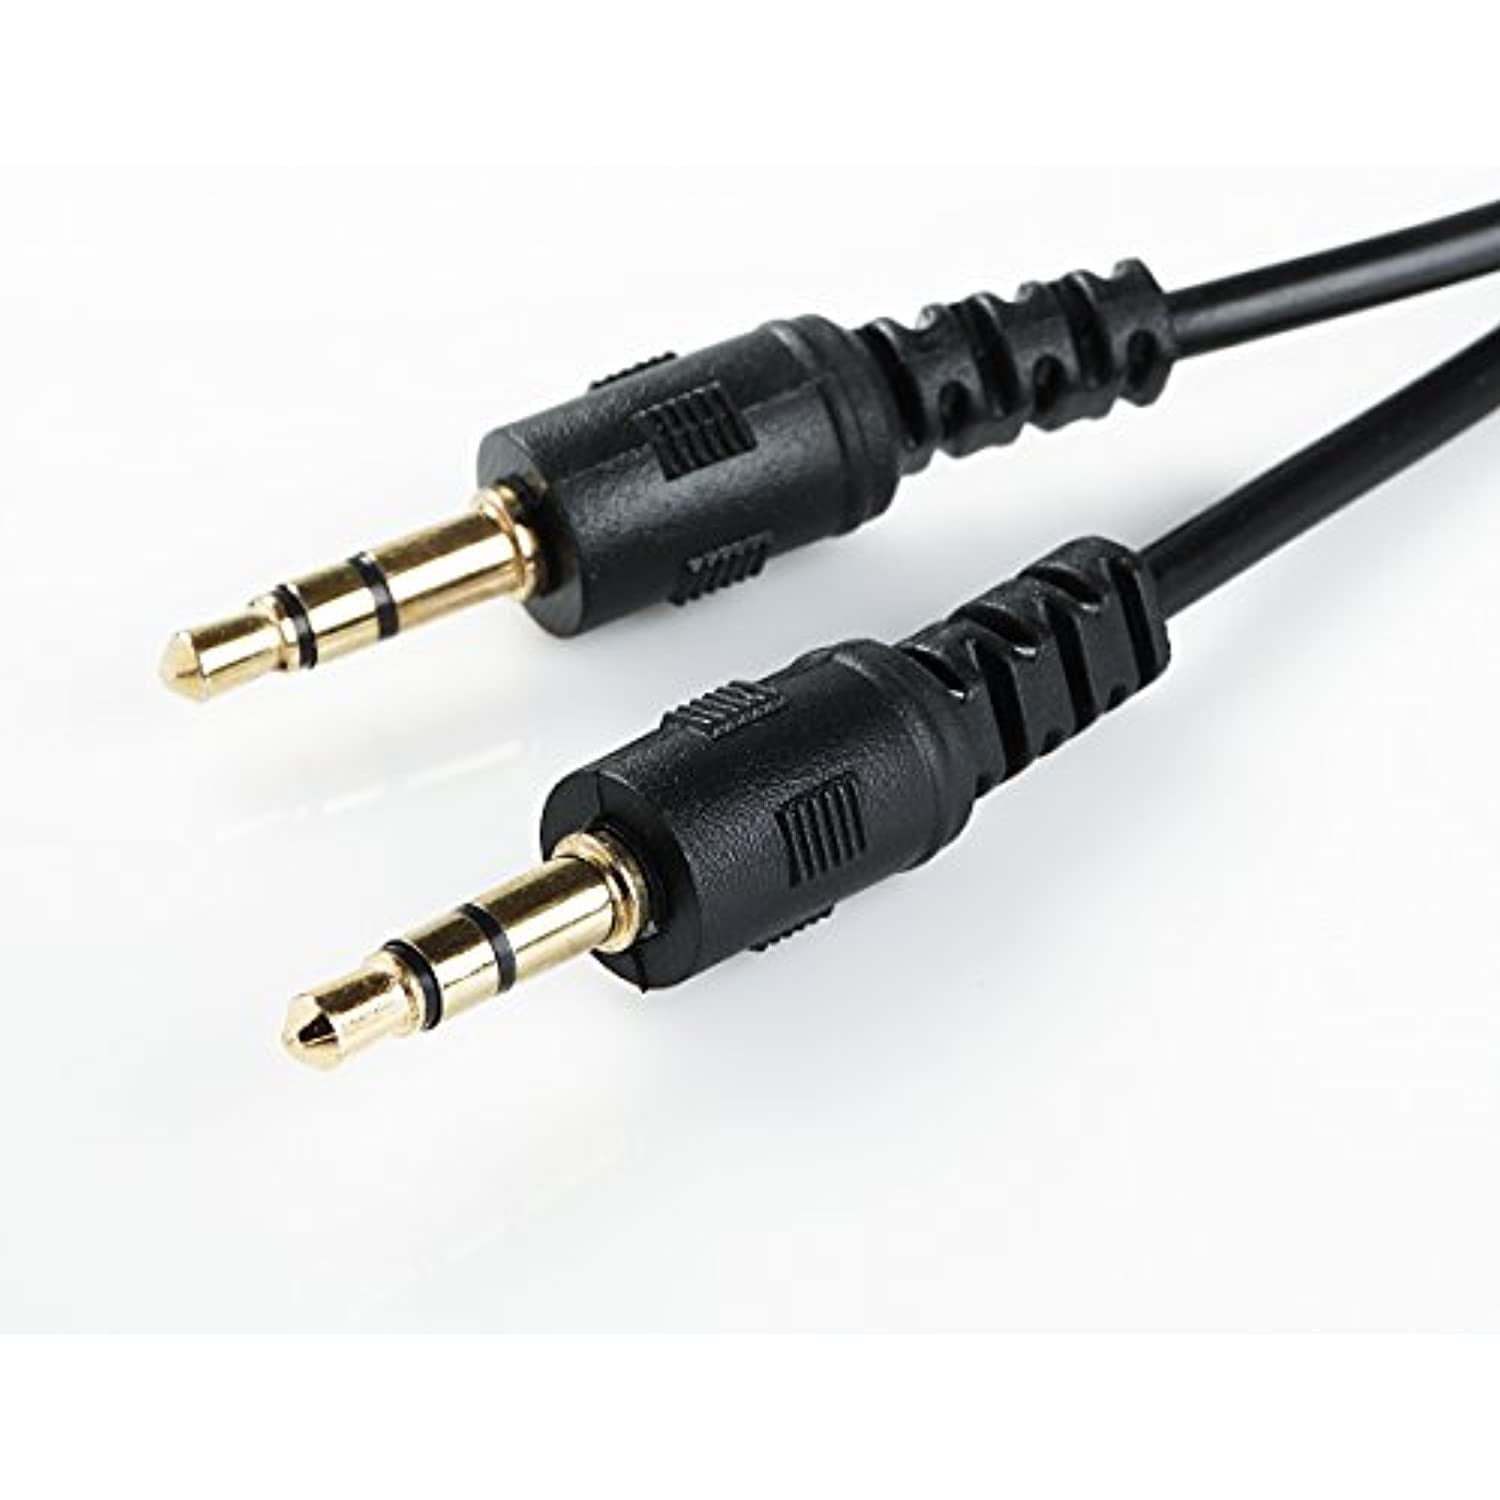 2m 6Ft 3.5mm 1/8" Stereo TRRS Male to Male Plug AV Gold Plated Lead Cord Cable 